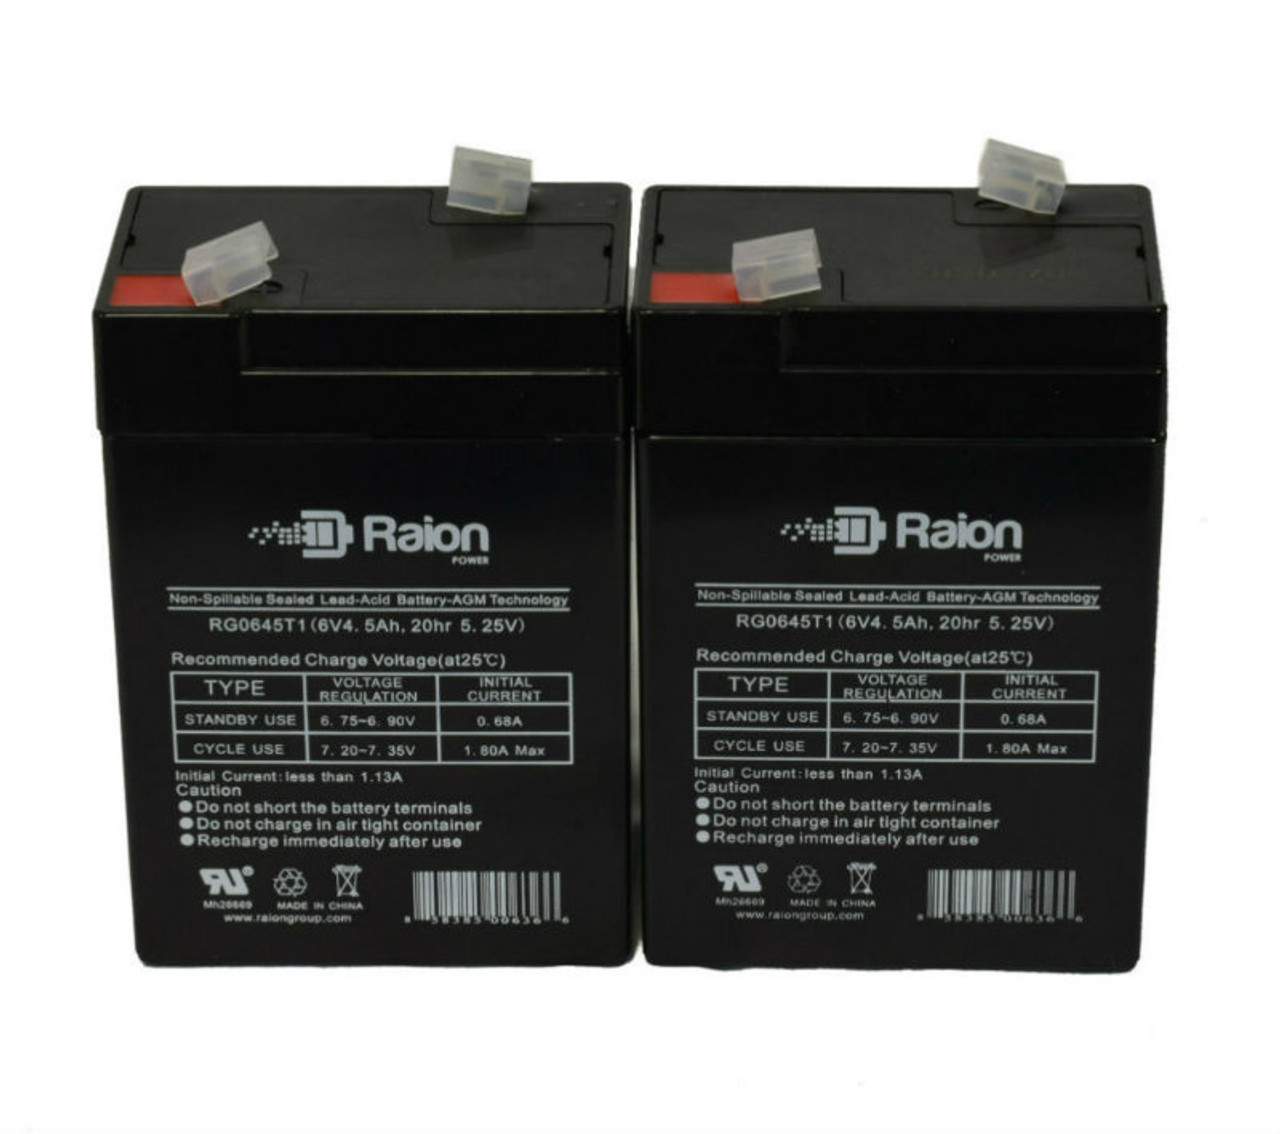 Raion Power 6 Volt 4.5Ah RG0645T1 Replacement Battery for R&D 5637 - 2 Pack